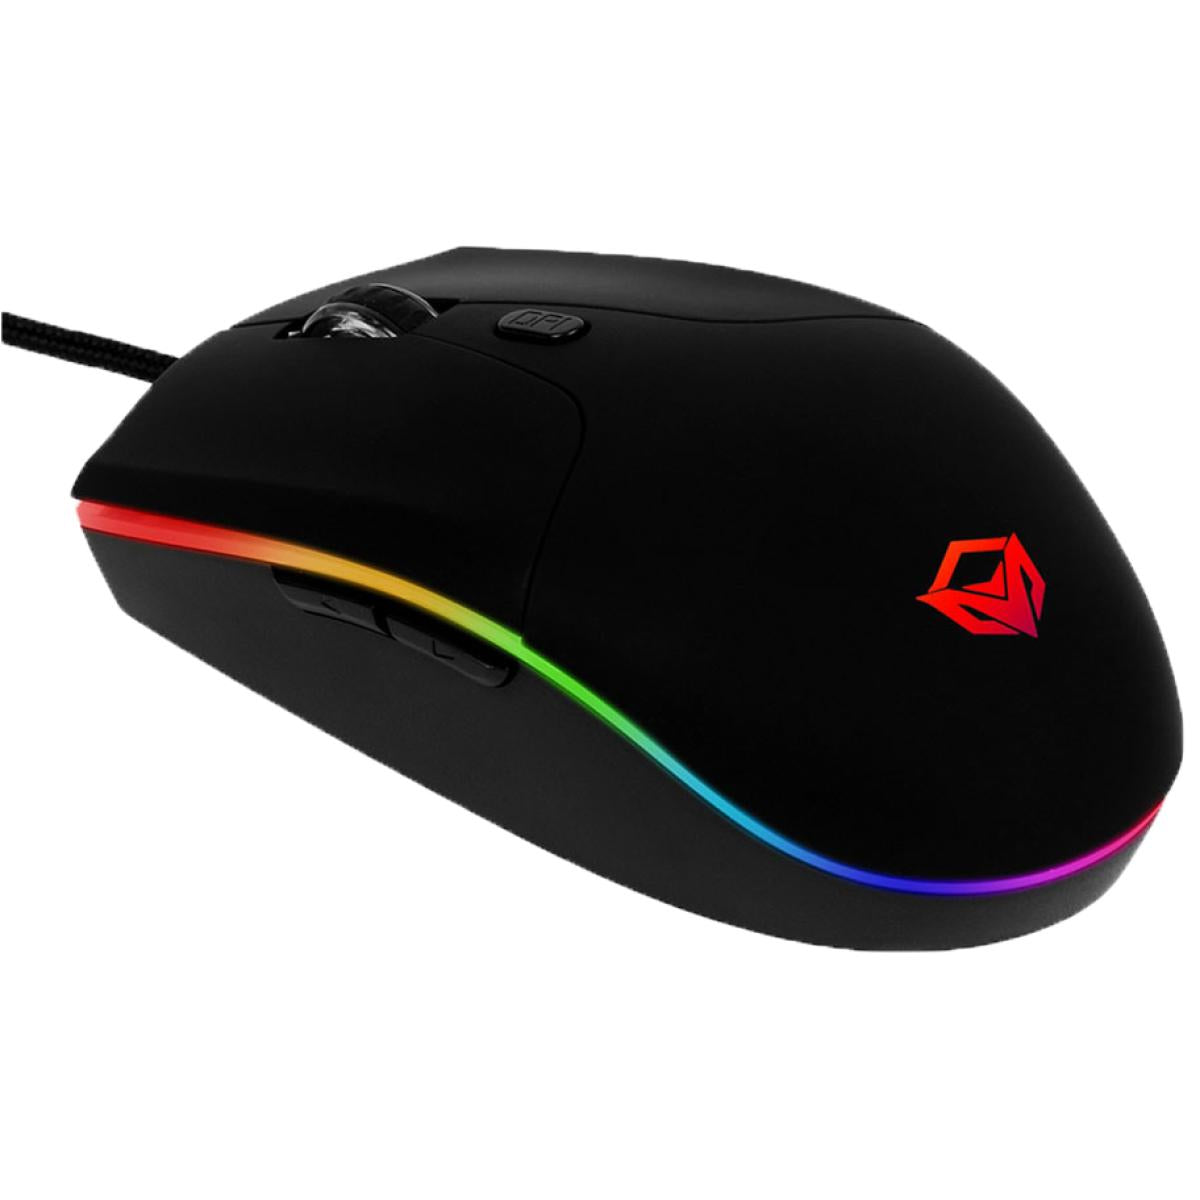 MeeTion Polychrome Gaming Mouse